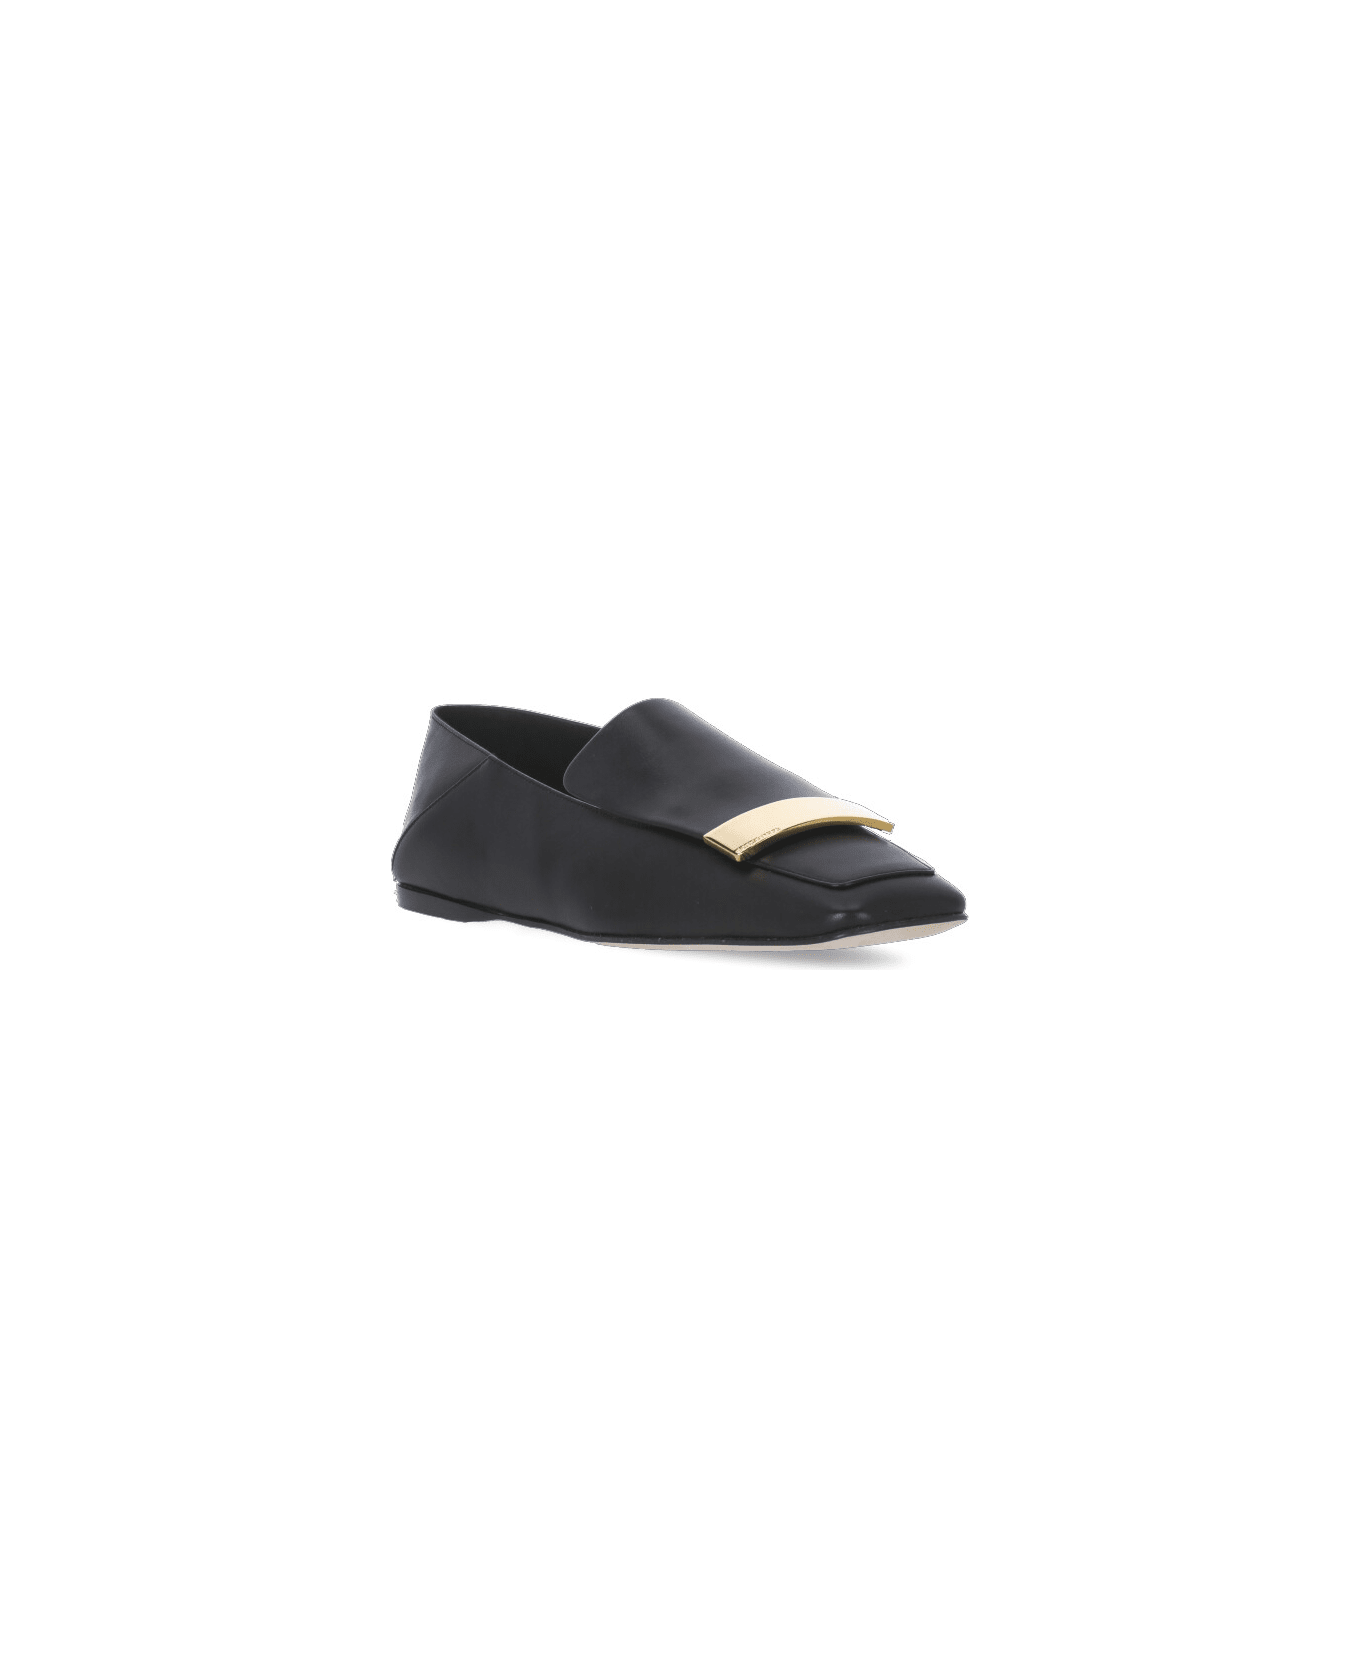 Sergio Rossi Leather Loafers - Black フラットシューズ